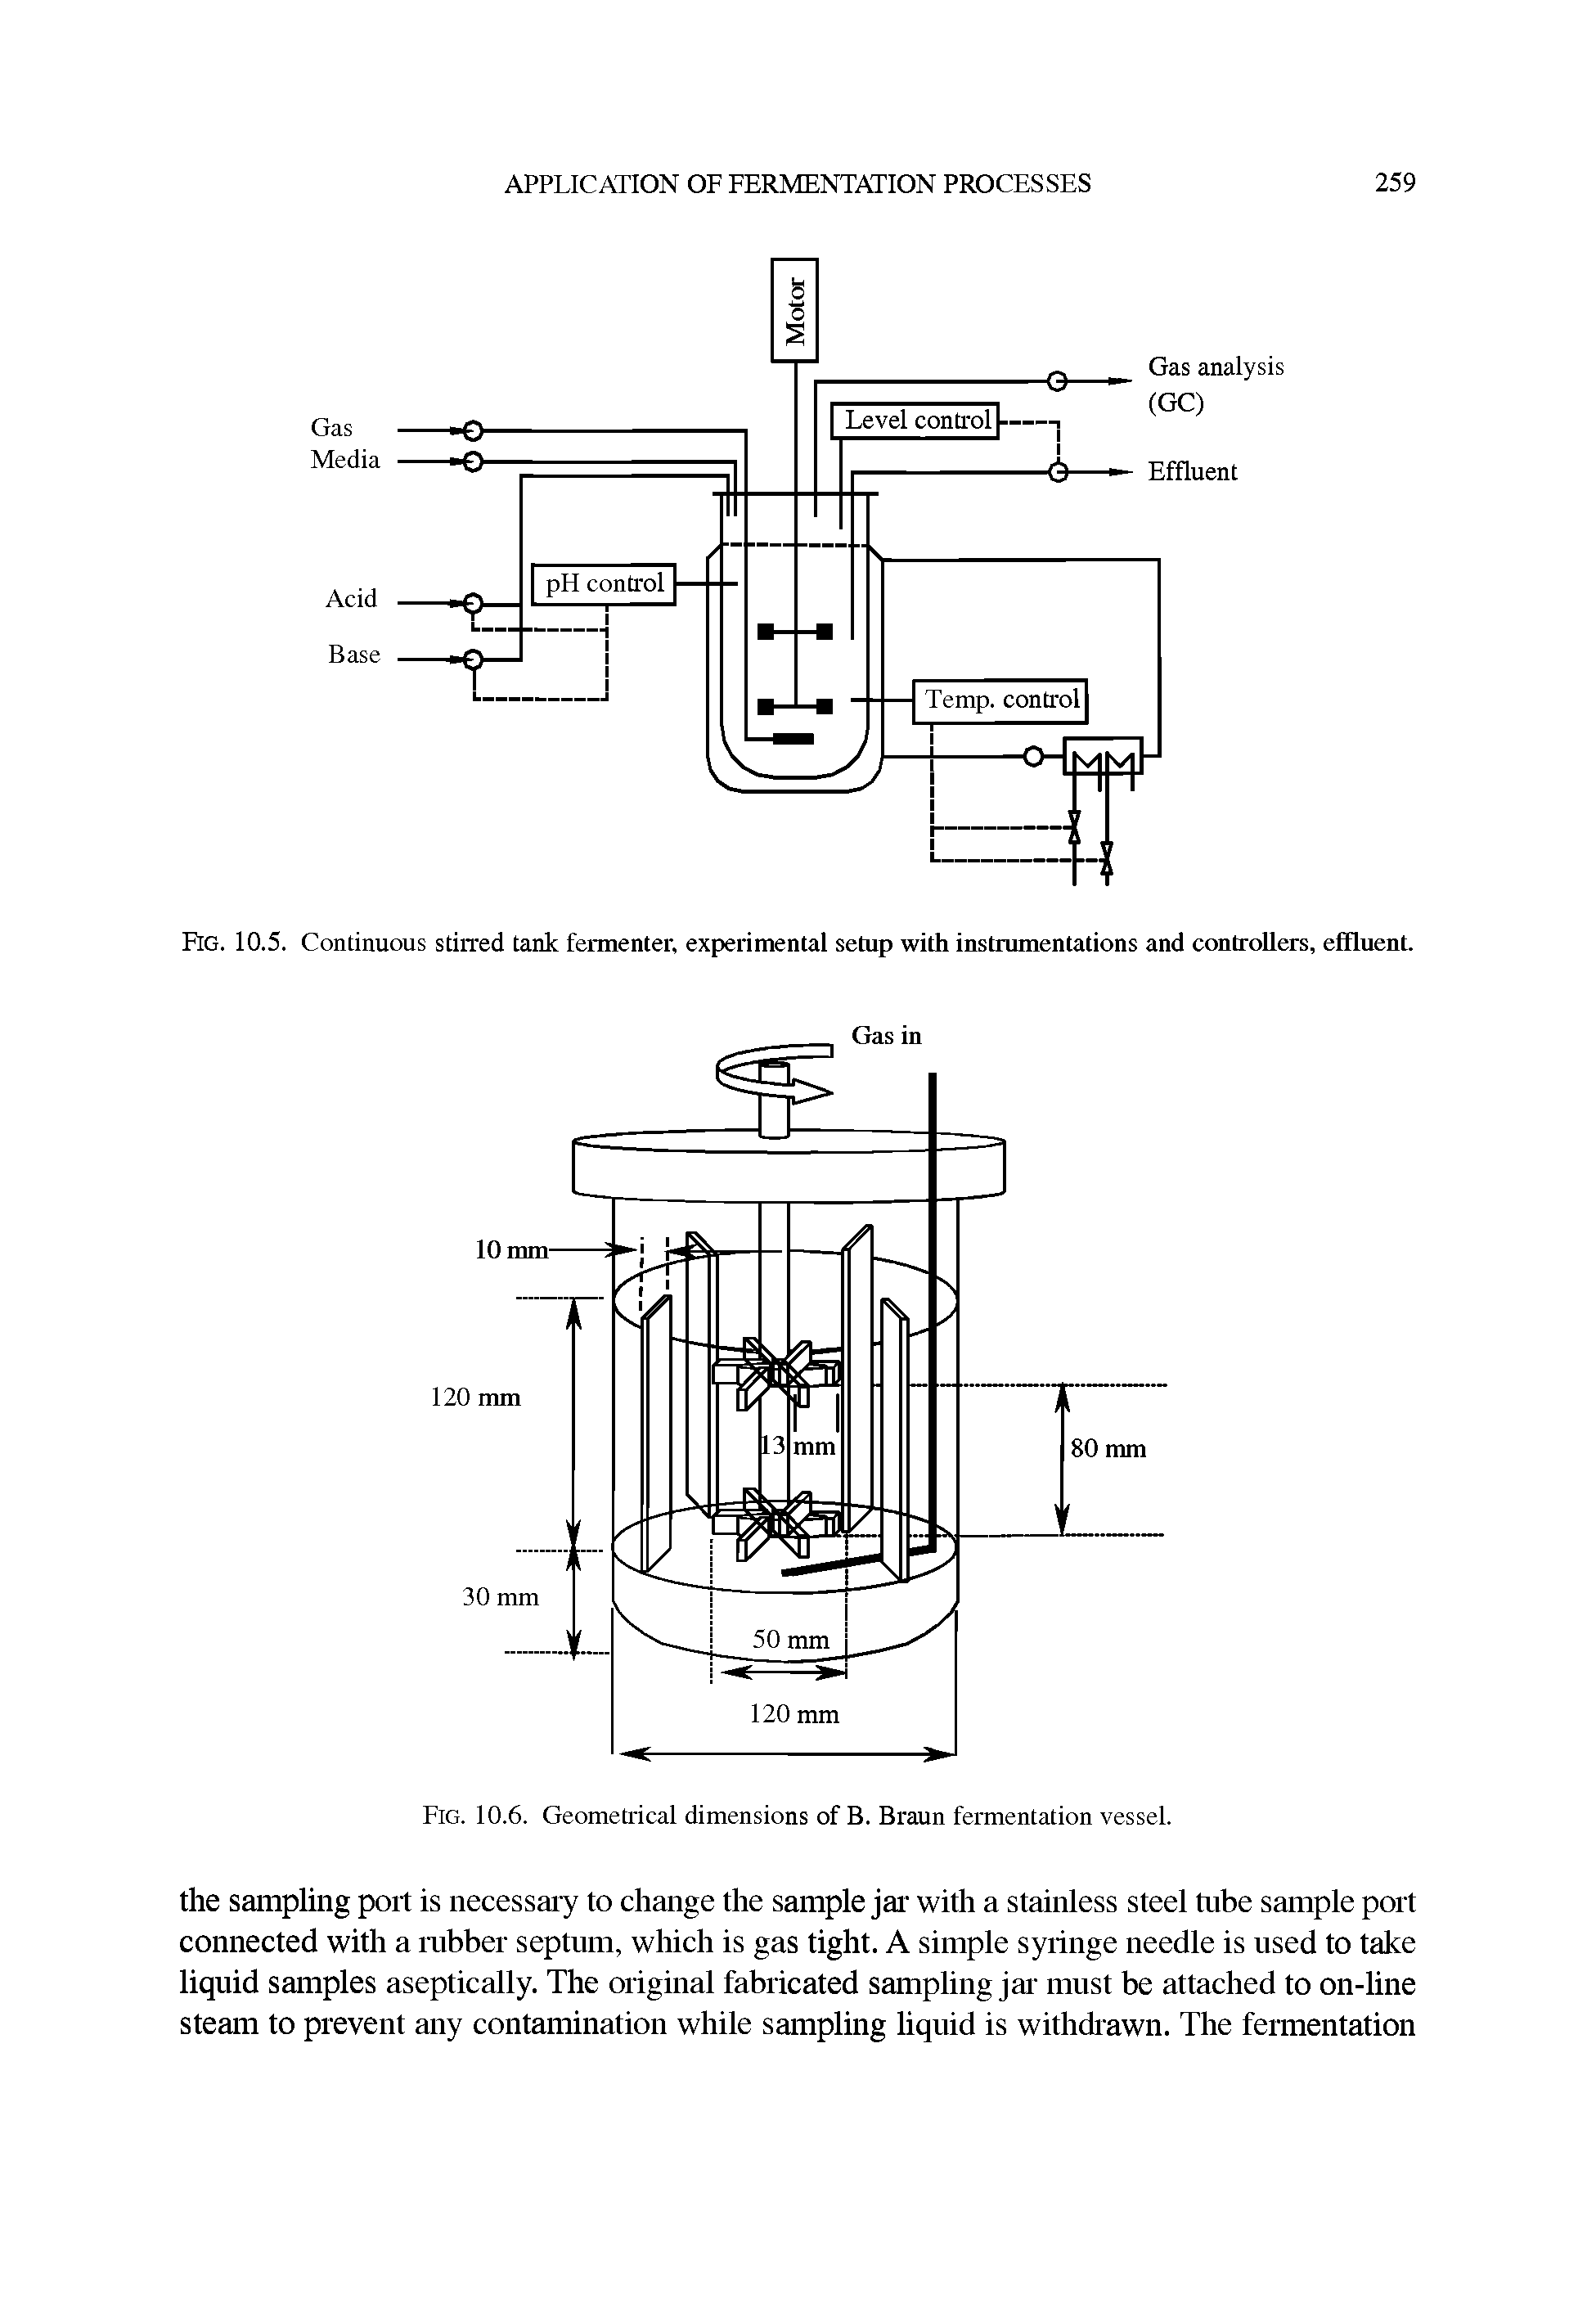 Fig. 10.5. Continuous stirred tank fermenter, experimental setup with instrumentations and controllers, effluent.